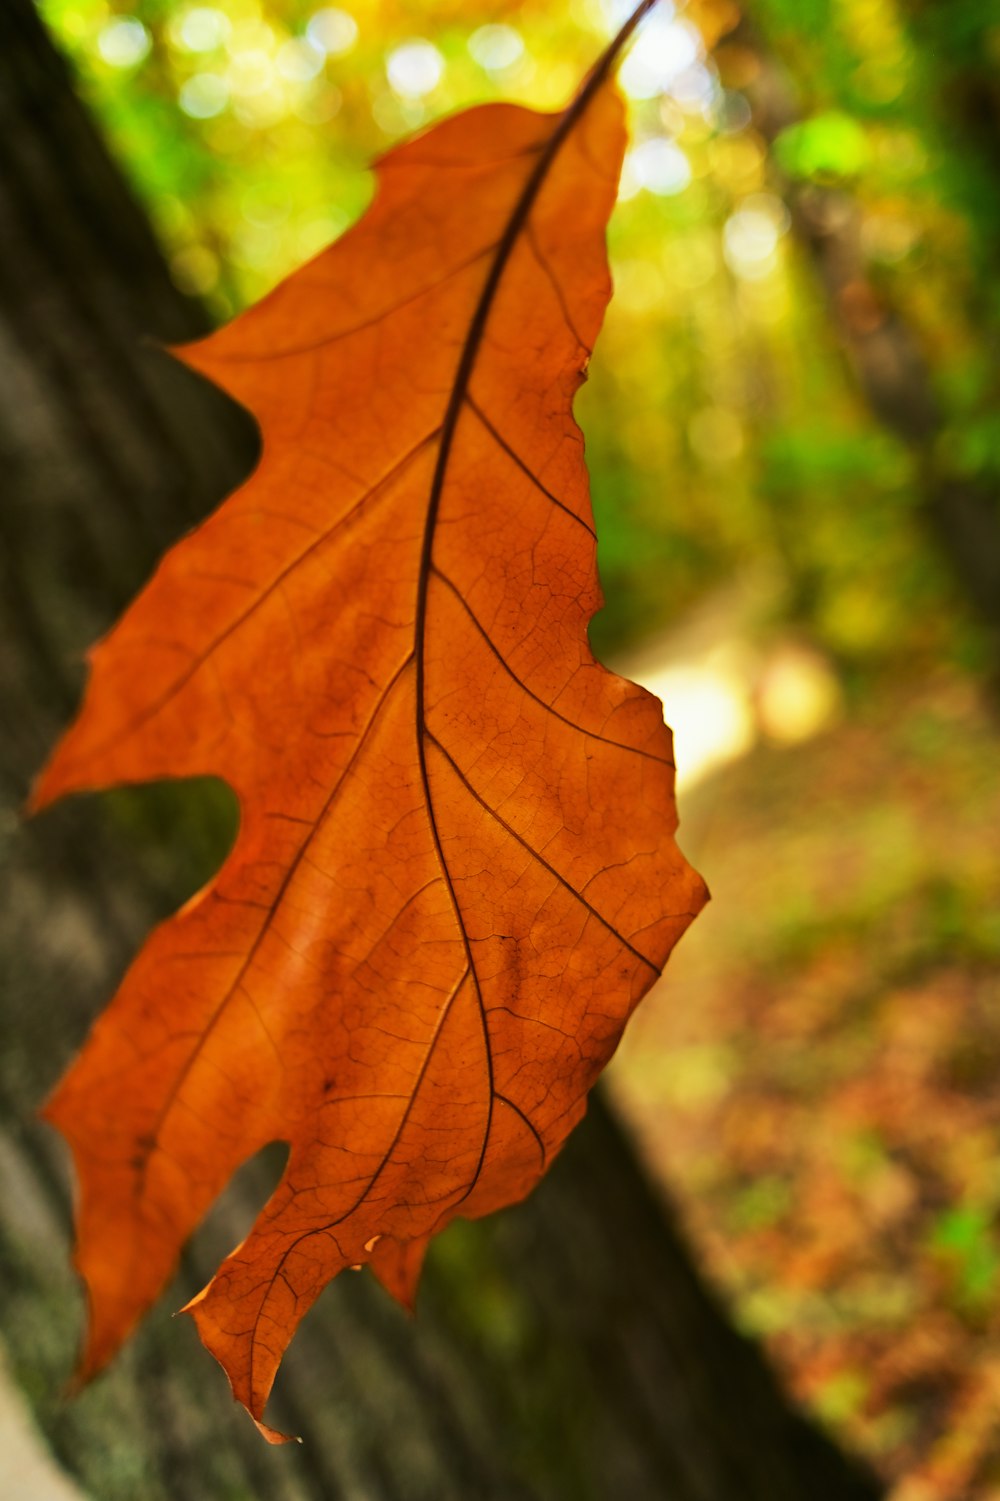 a single leaf hanging from a tree in a forest